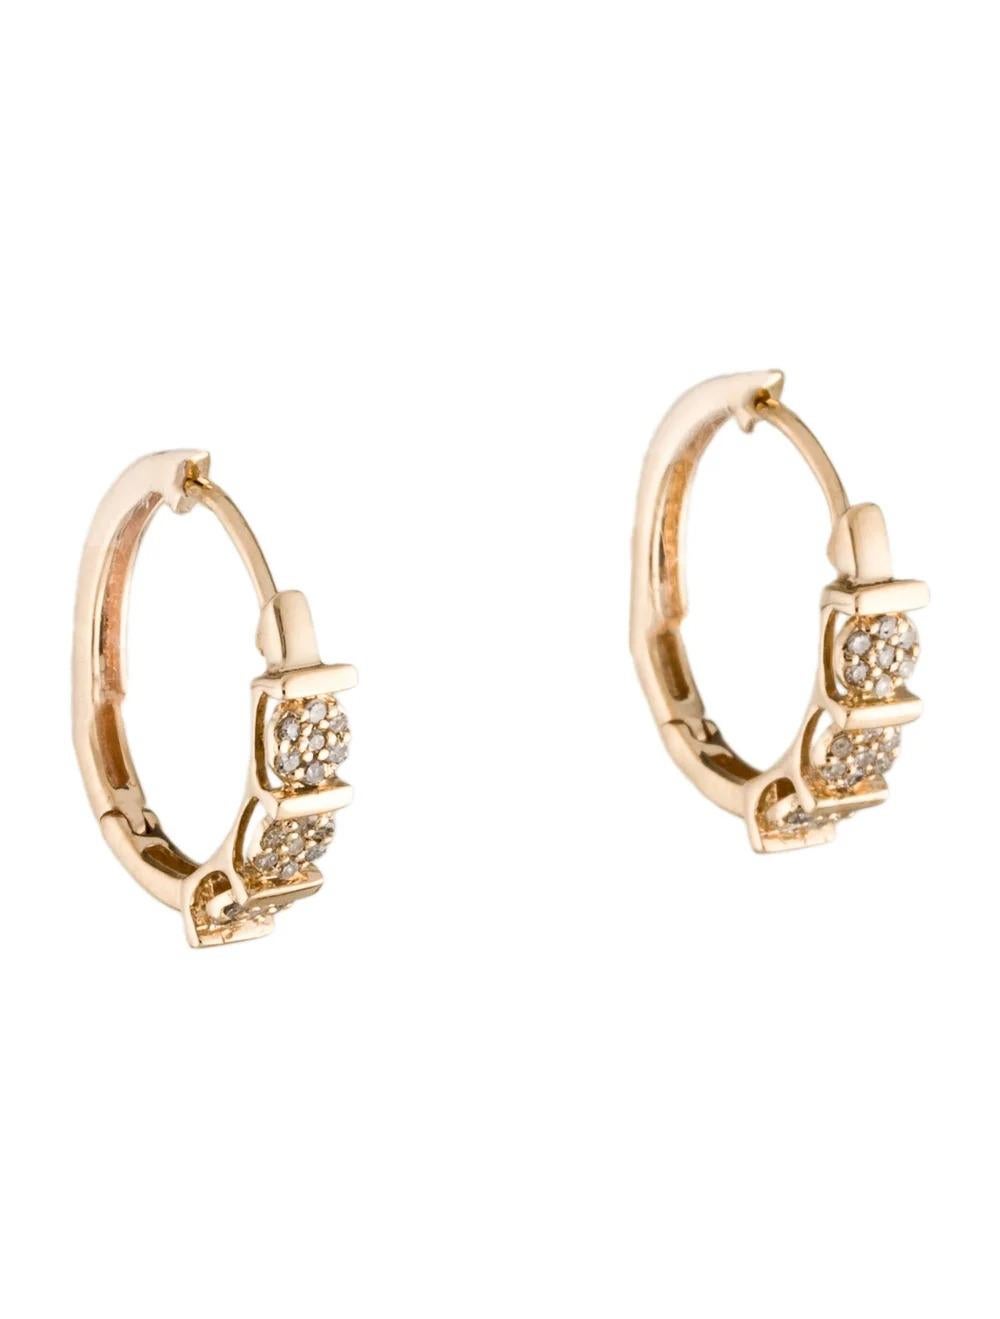 Enhance your elegance with these stunning 14K yellow gold diamond hoop earrings, a timeless accessory for any occasion.

Specifications:

* Metal Type: 14K Yellow Gold
* Length: 0.75 inches
* Width: 0.25 inches
* Total Item Weight: 2.9 grams
*